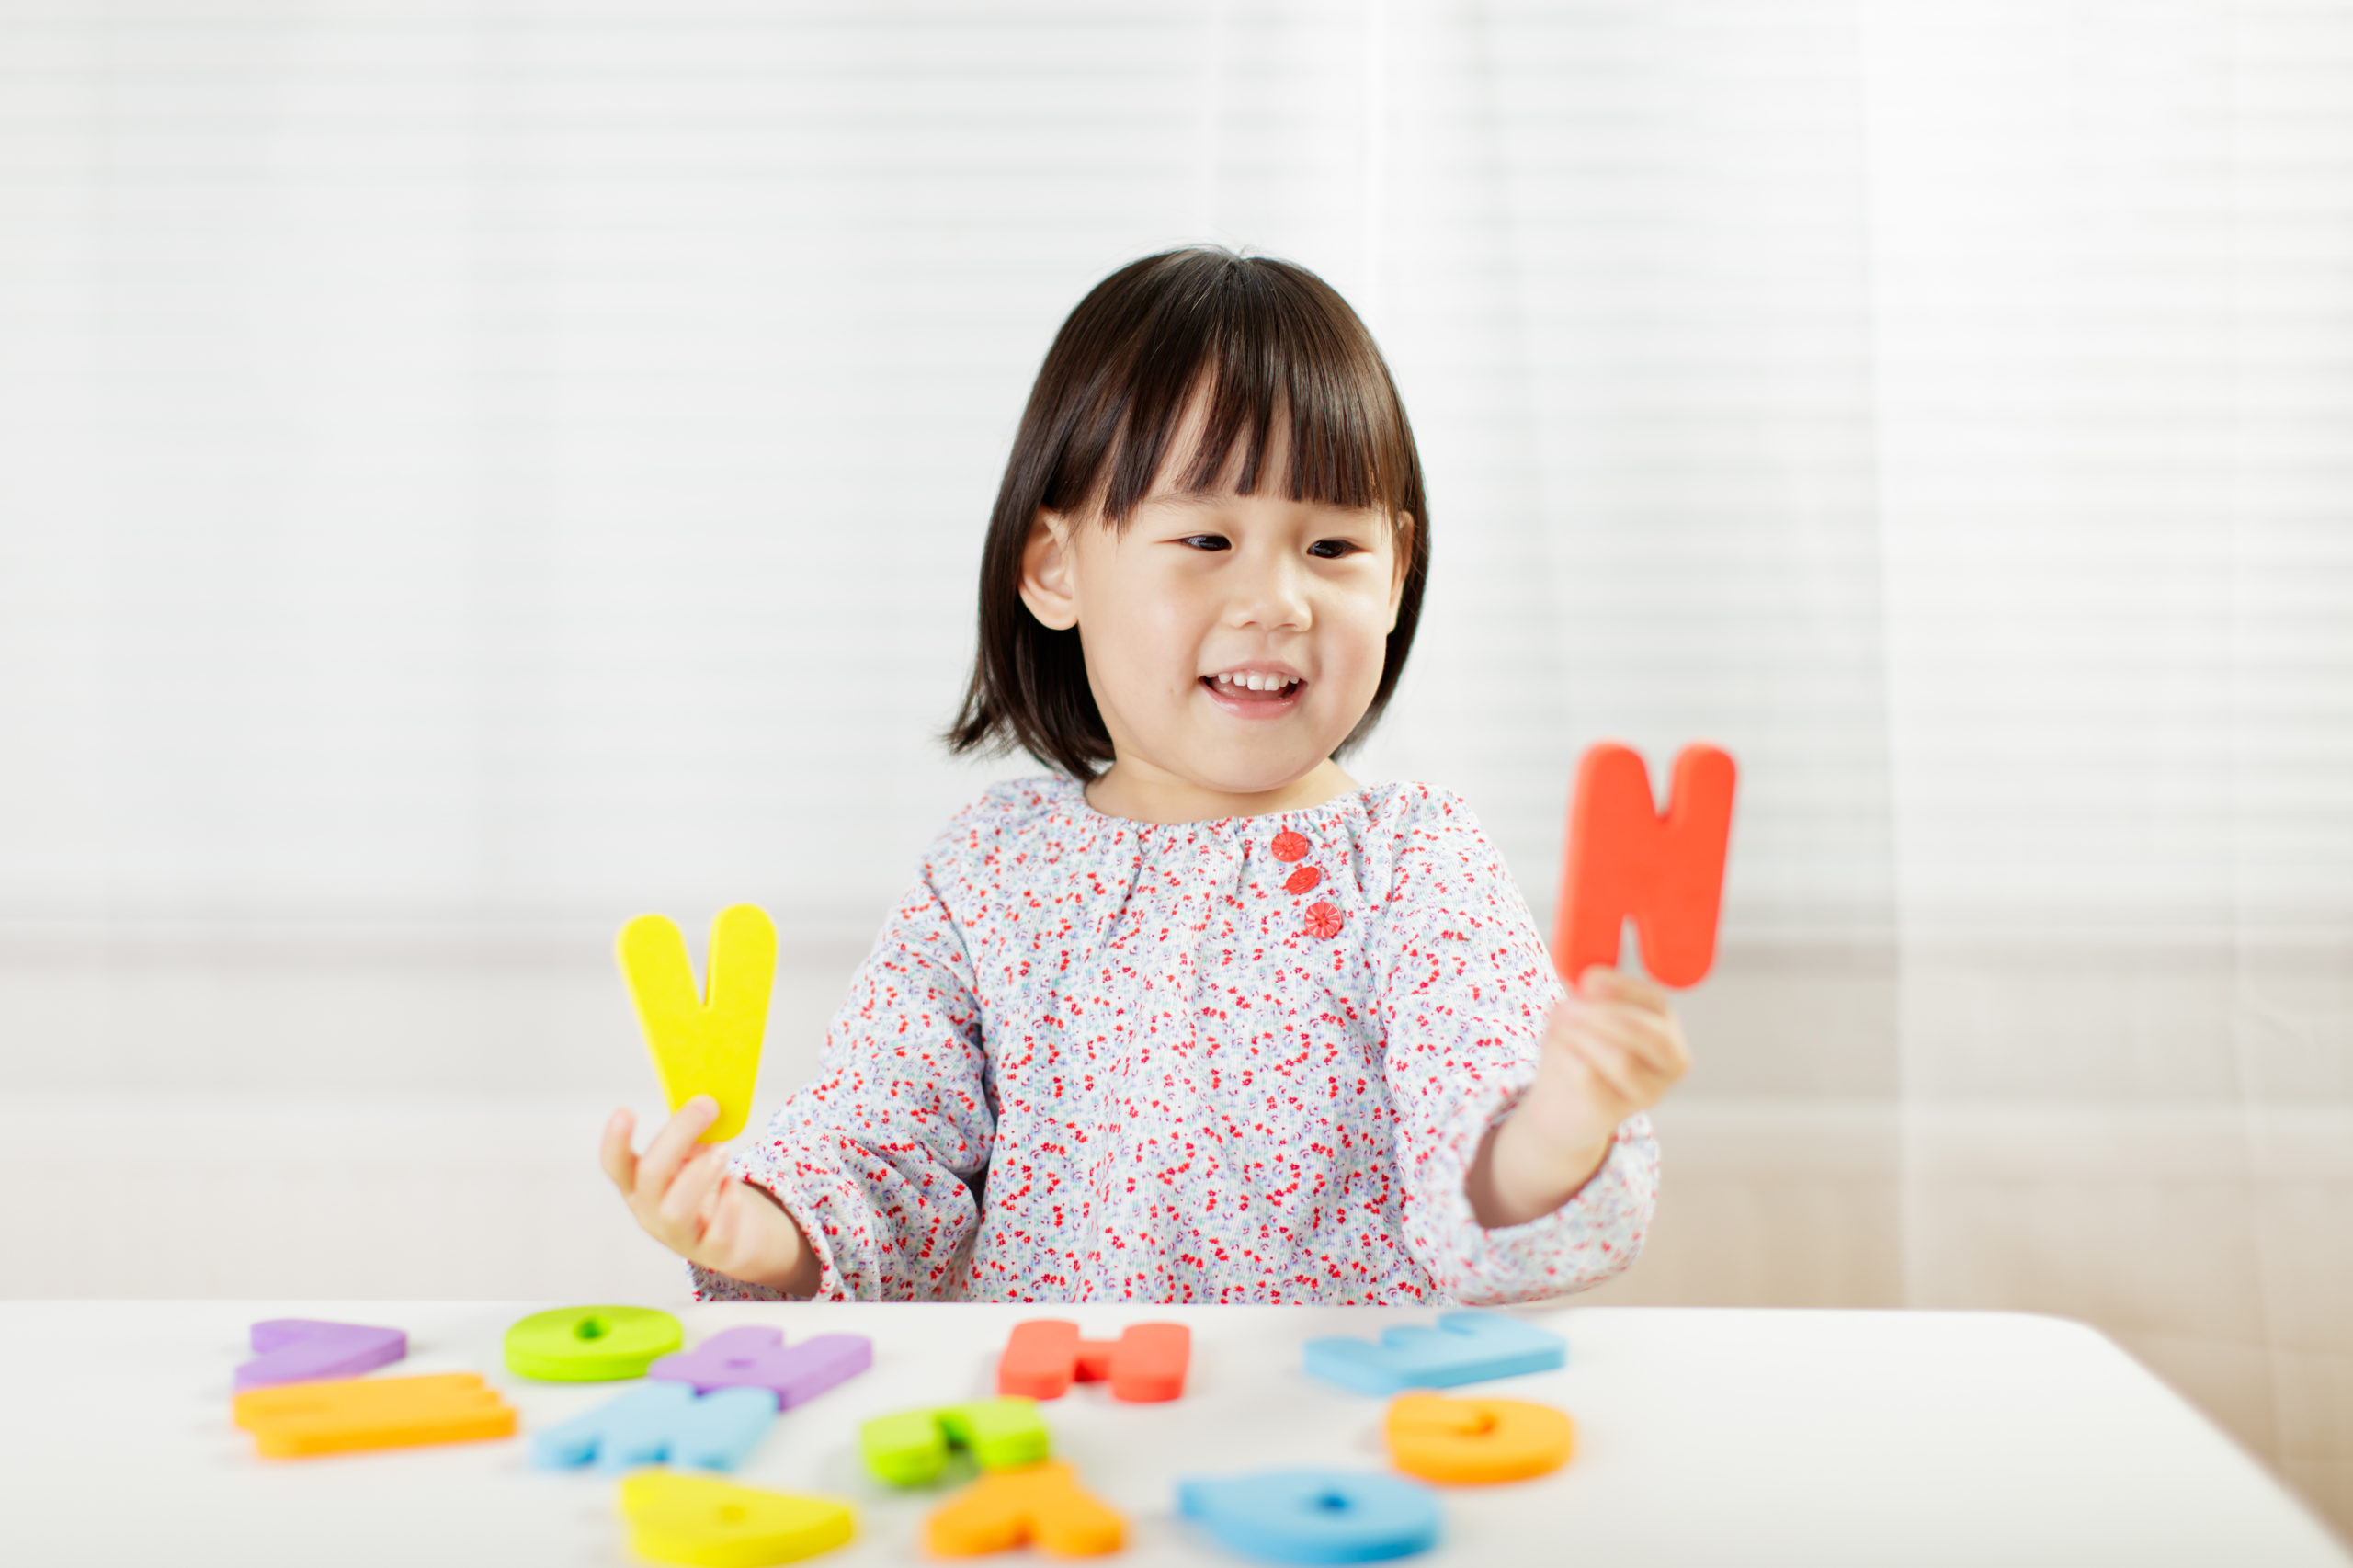 Early Literacy Tip: Focus on the Letters in Your Child’s Name